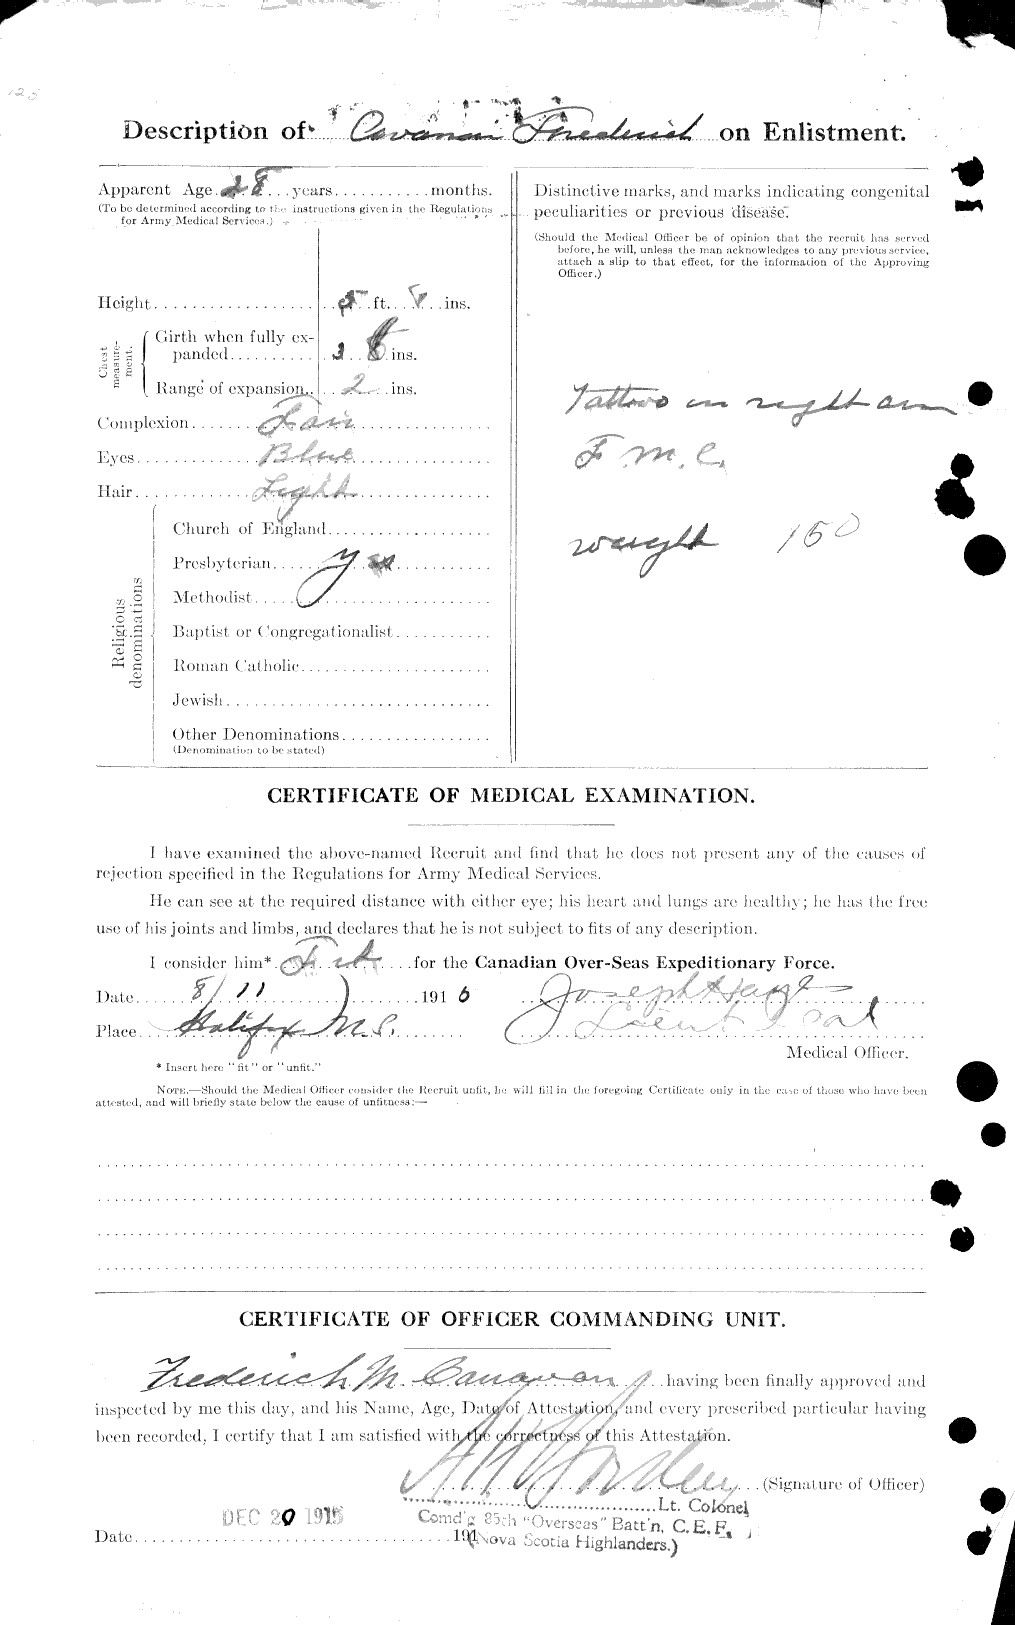 Personnel Records of the First World War - CEF 008853b